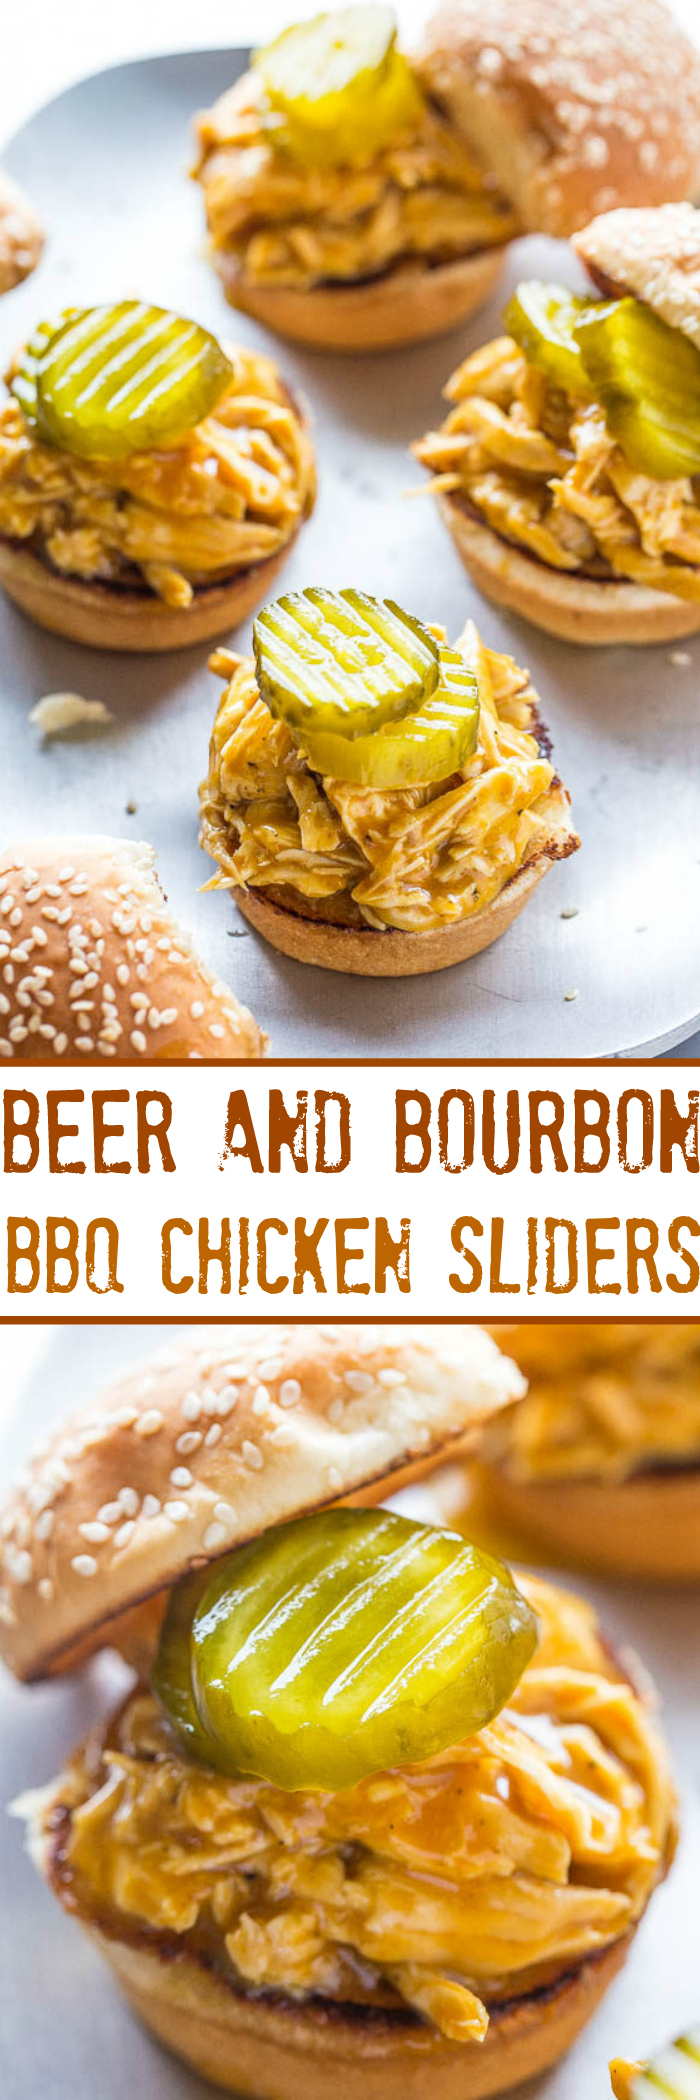 Beer and Bourbon Barbecue Chicken Sliders - Chicken is cooked with BEER and BOURBON before being soaked in BBQ SAUCE!! So juicy, flavorful, easy, and ready in 25 minutes! A guaranteed hit at parties!!